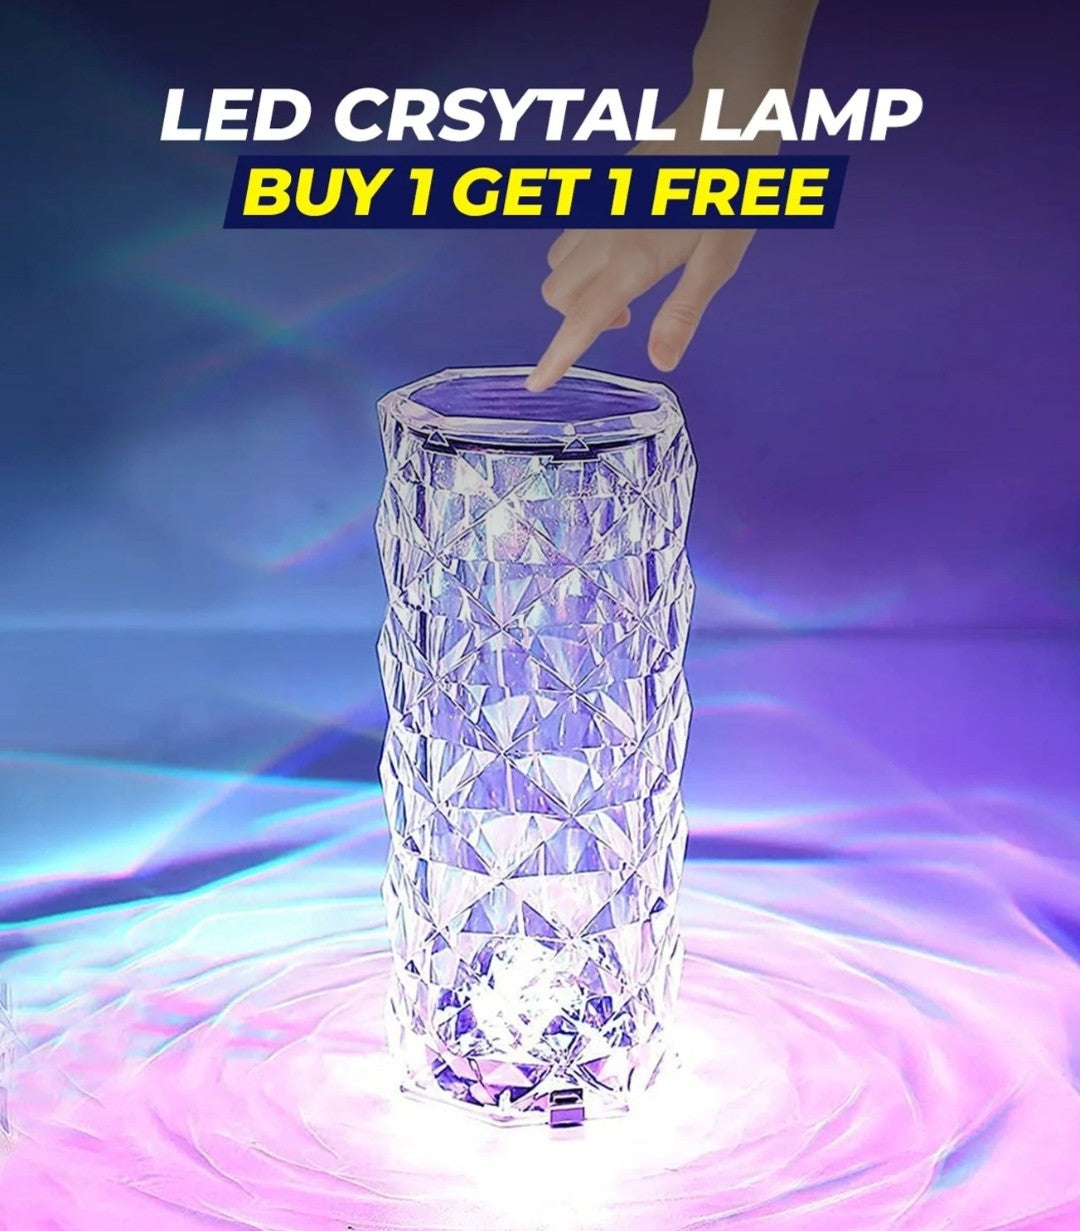 Buy 1 Get 1 Free USB Touch Crystal Diamond Table Lamp With Colour Lighting 21x9x9cm